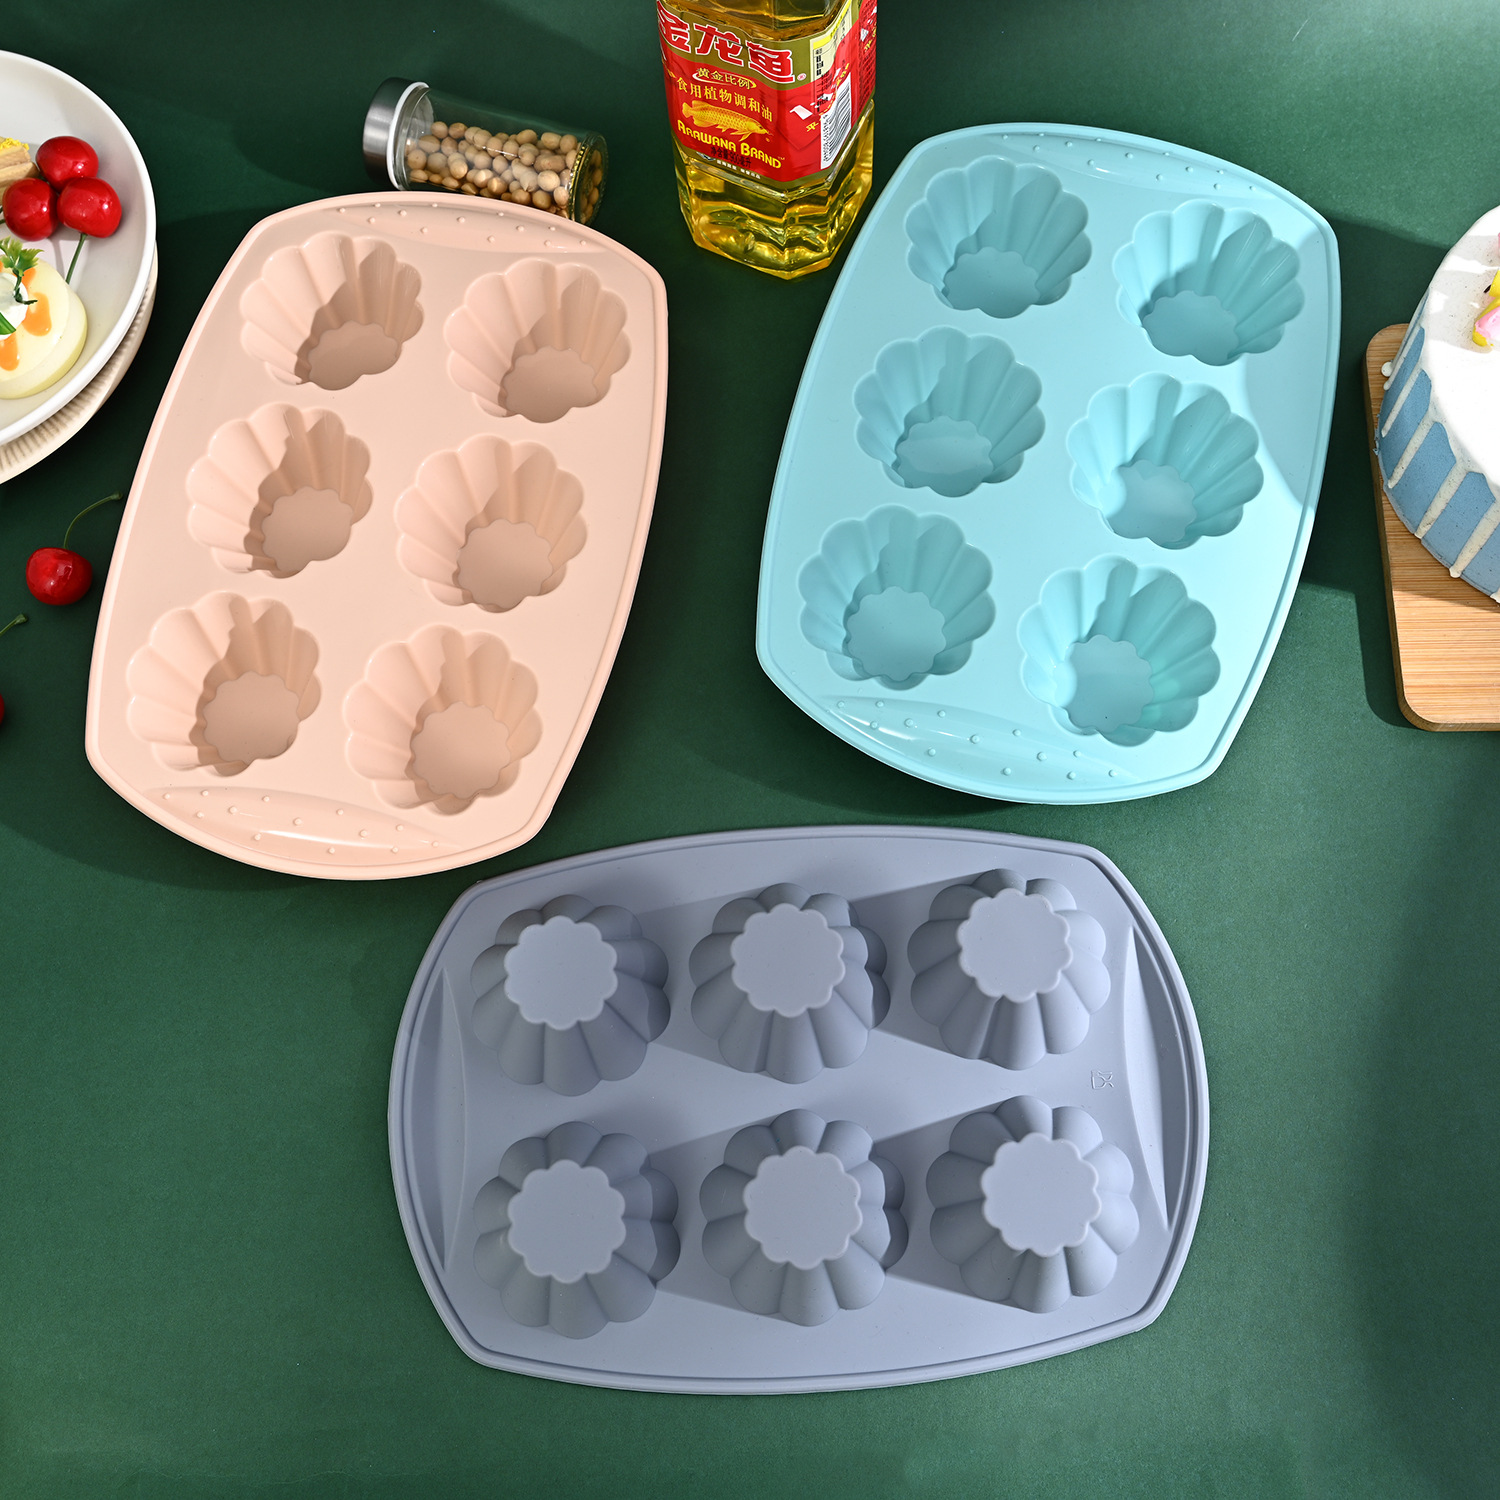 Factory Wholesale Baking at Home Utensils 6-Piece Pattern Baking Mold Edible Silicon Cake Mold Muffin Cup